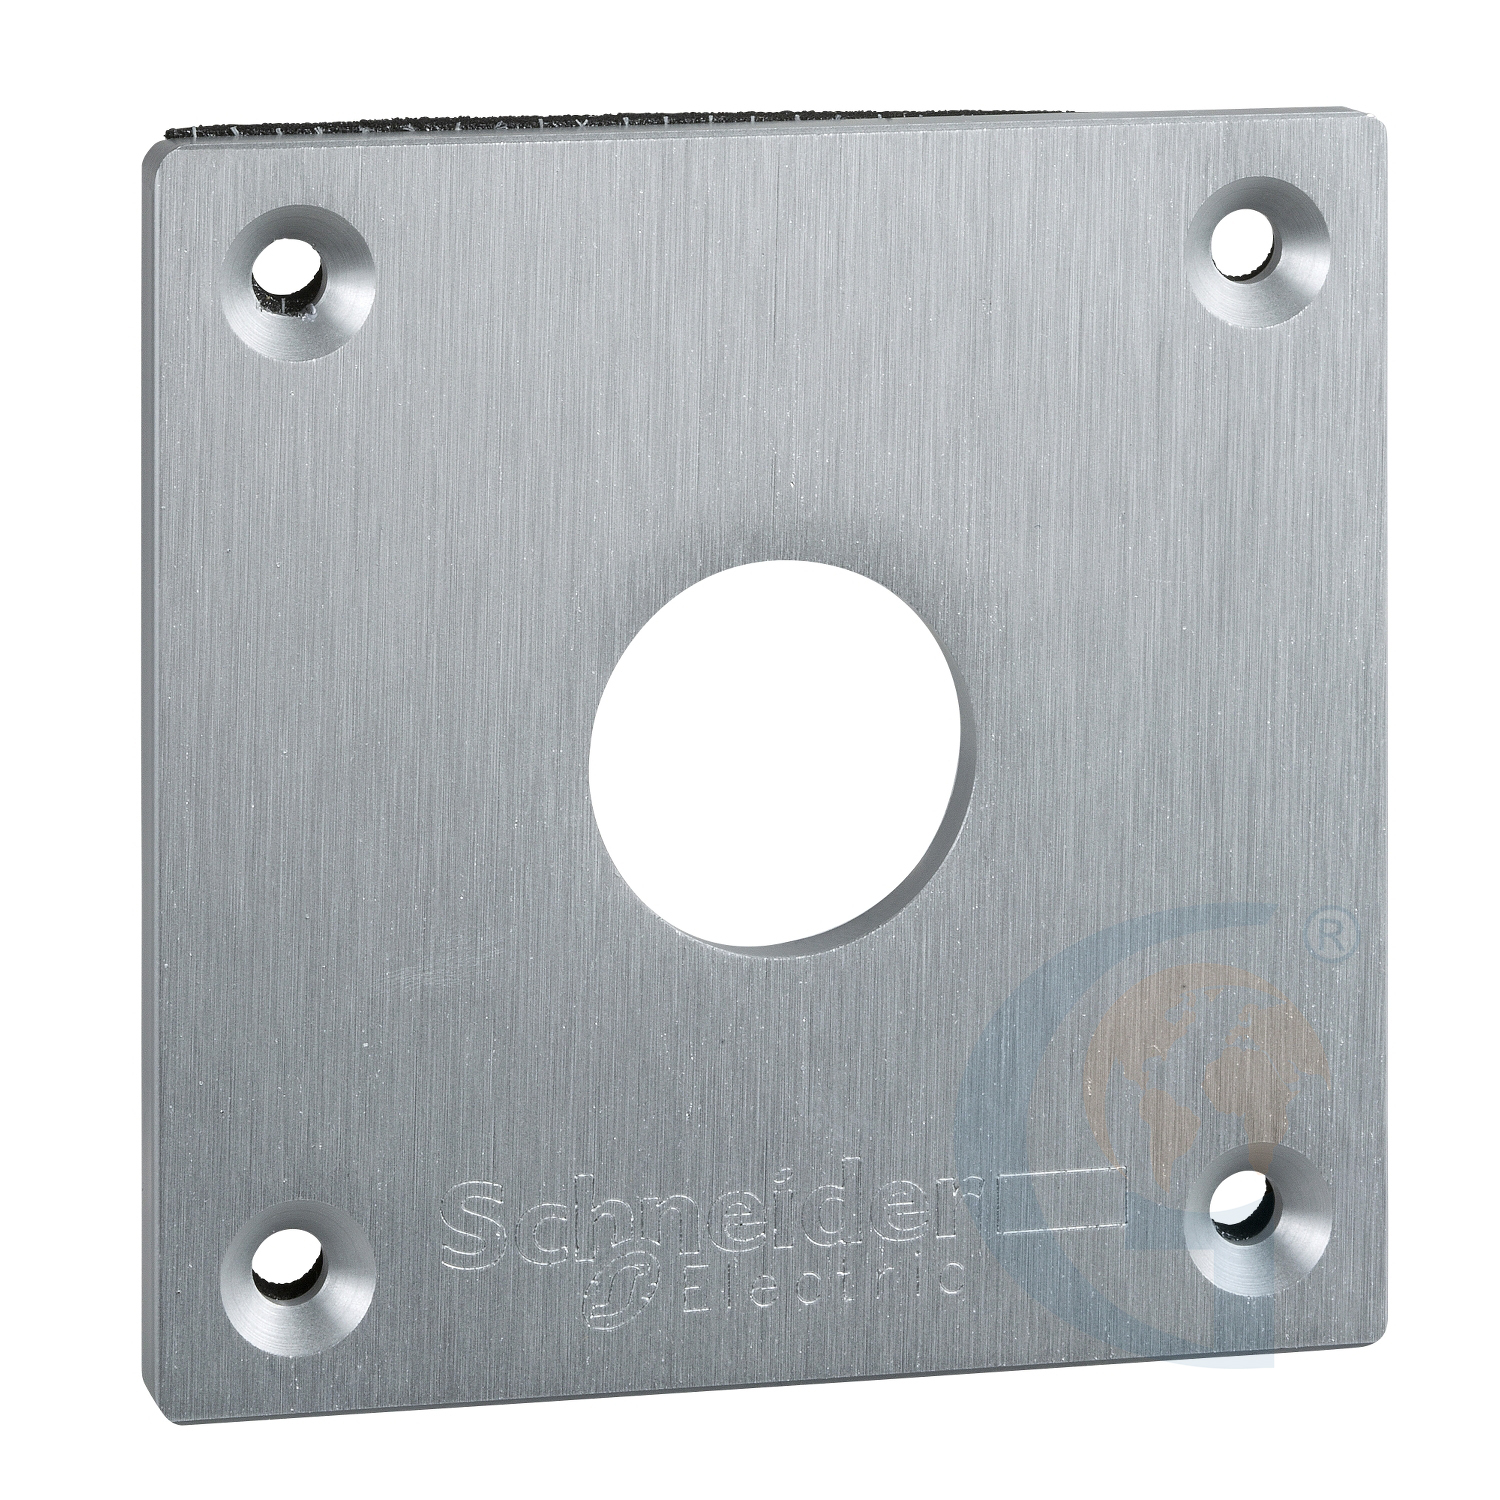 Schneider Electric XAPE301 drilled front plate – XAP-E – metal – 1 opening https://gesrepair.com/wp-content/uploads/2020/Schneider/Schneider_Electric_XAPE301_.jpg